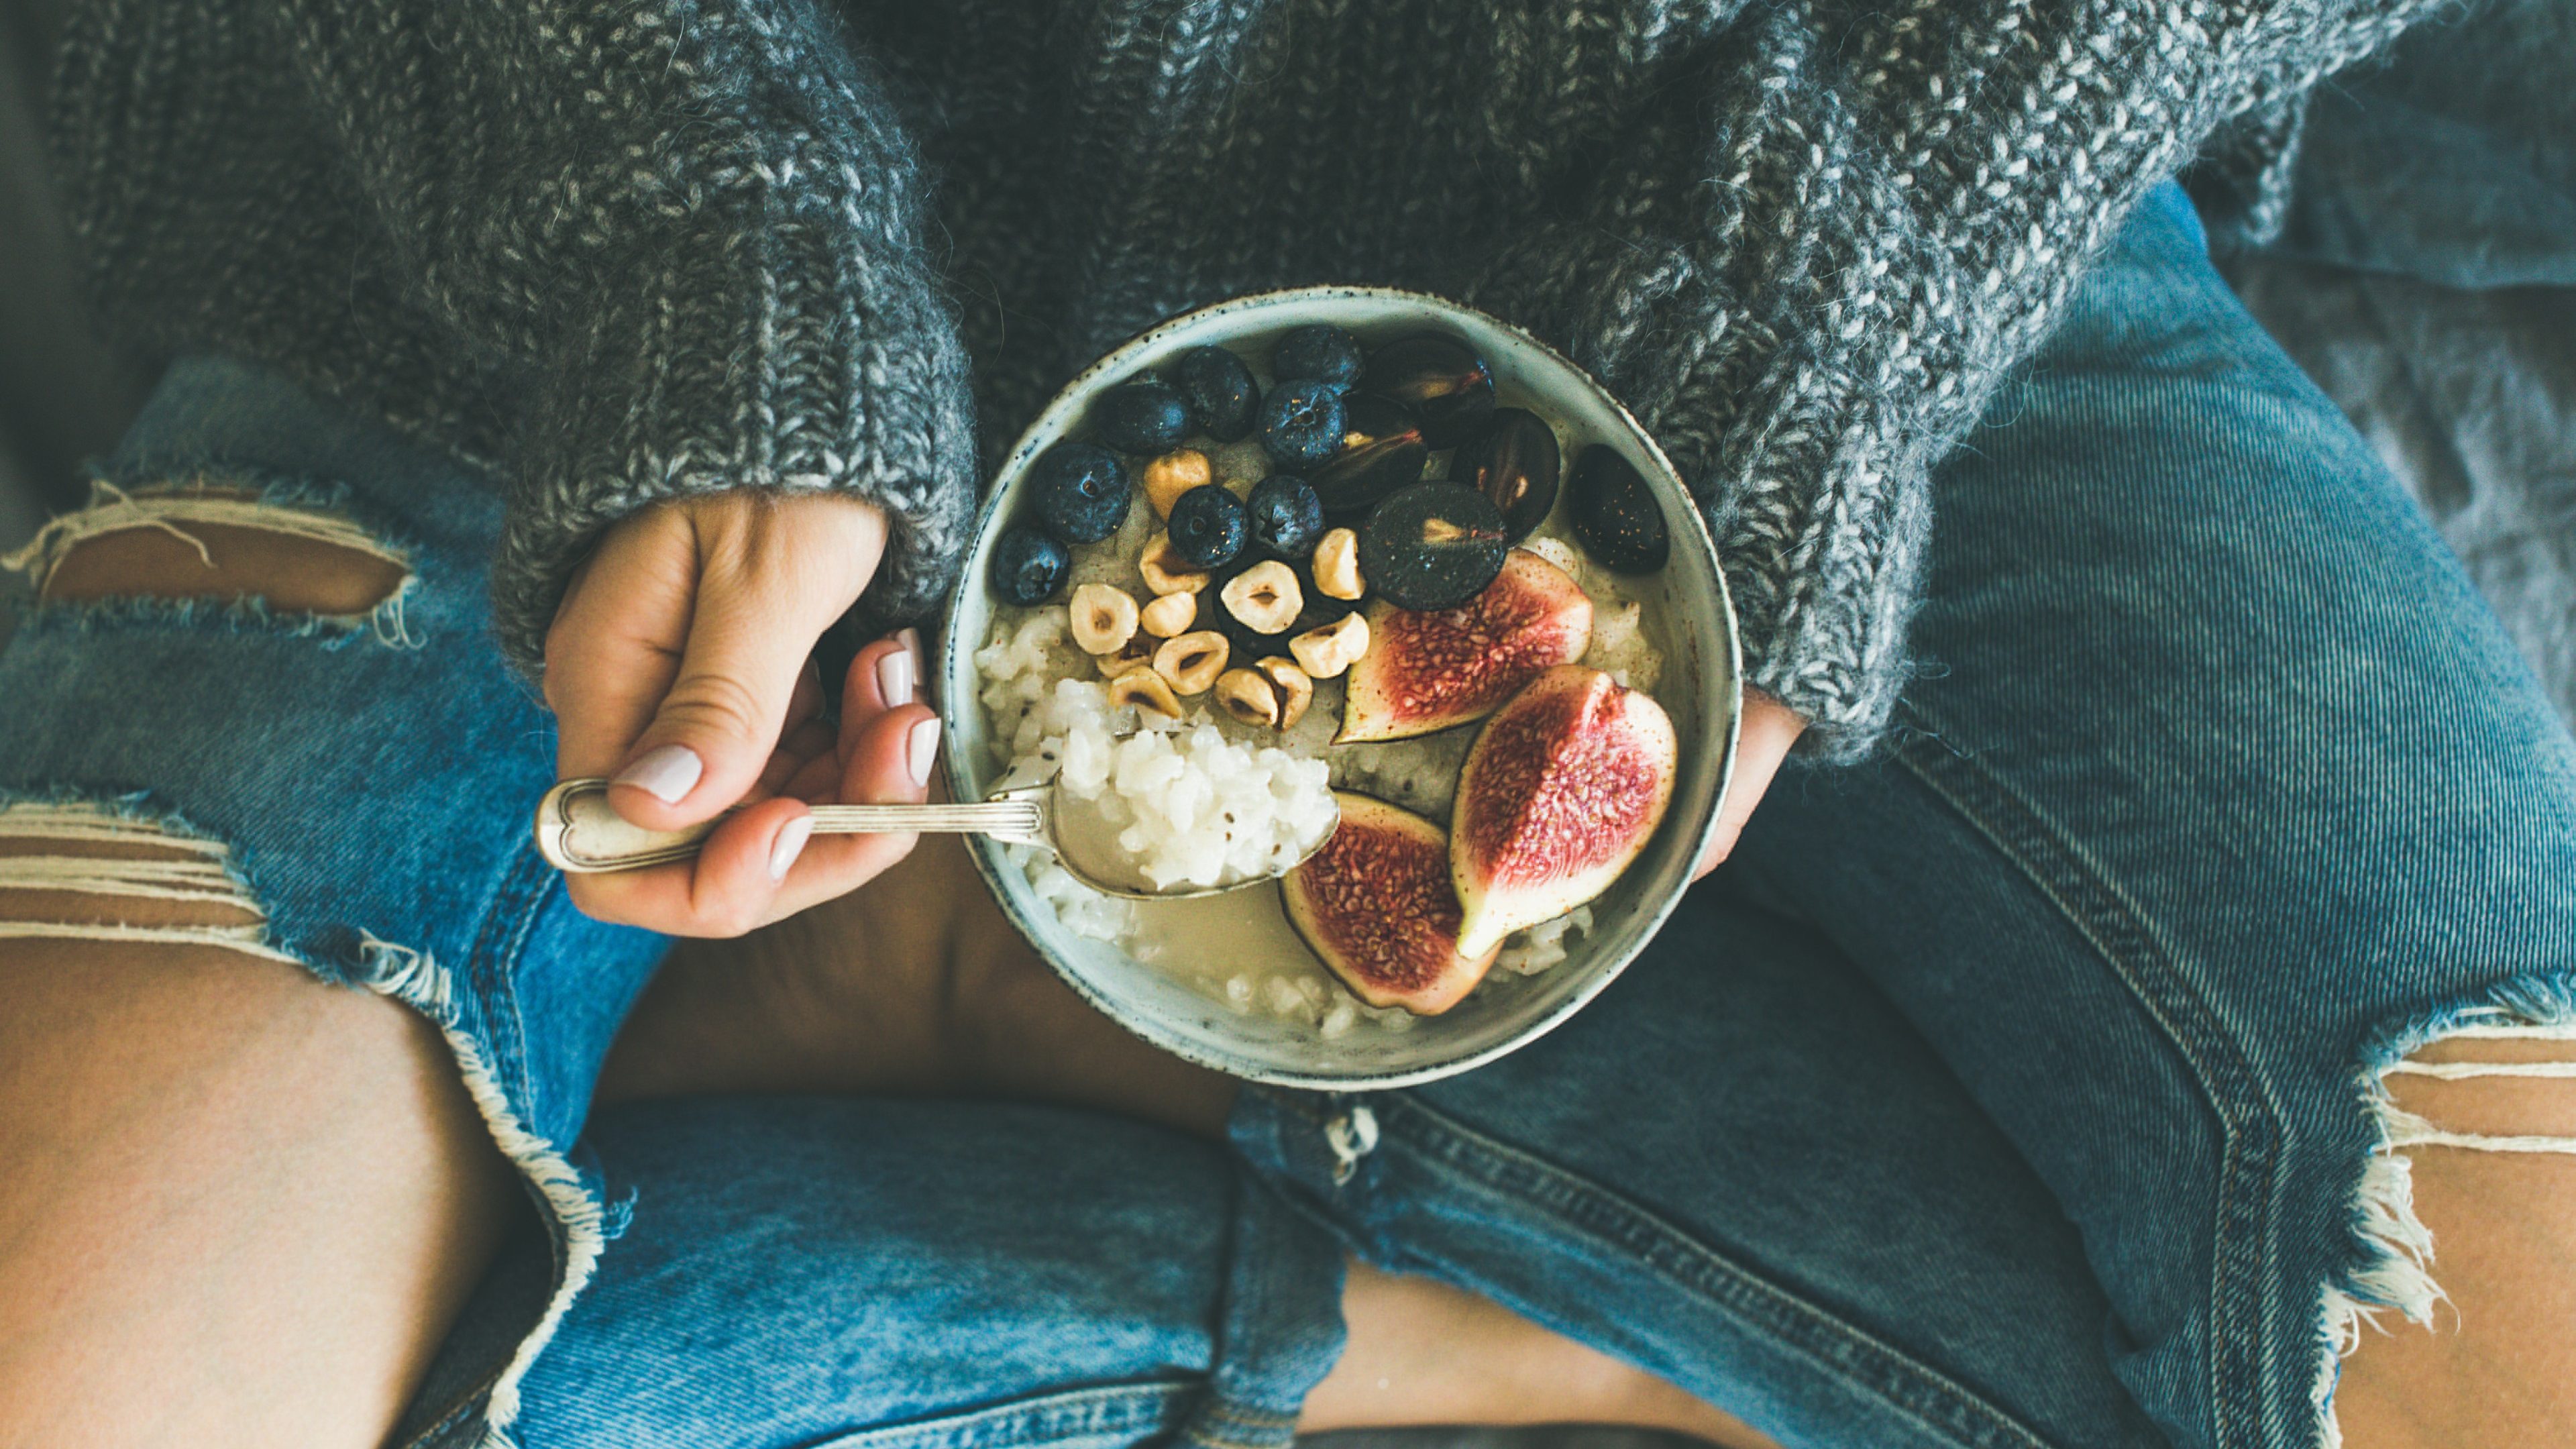 Healthy winter breakfast in bed. Woman in woolen sweater and shabby jeans eating rice coconut porridge with figs, berries, hazelnuts, top view. Clean eating, vegetarian, comfort food concept